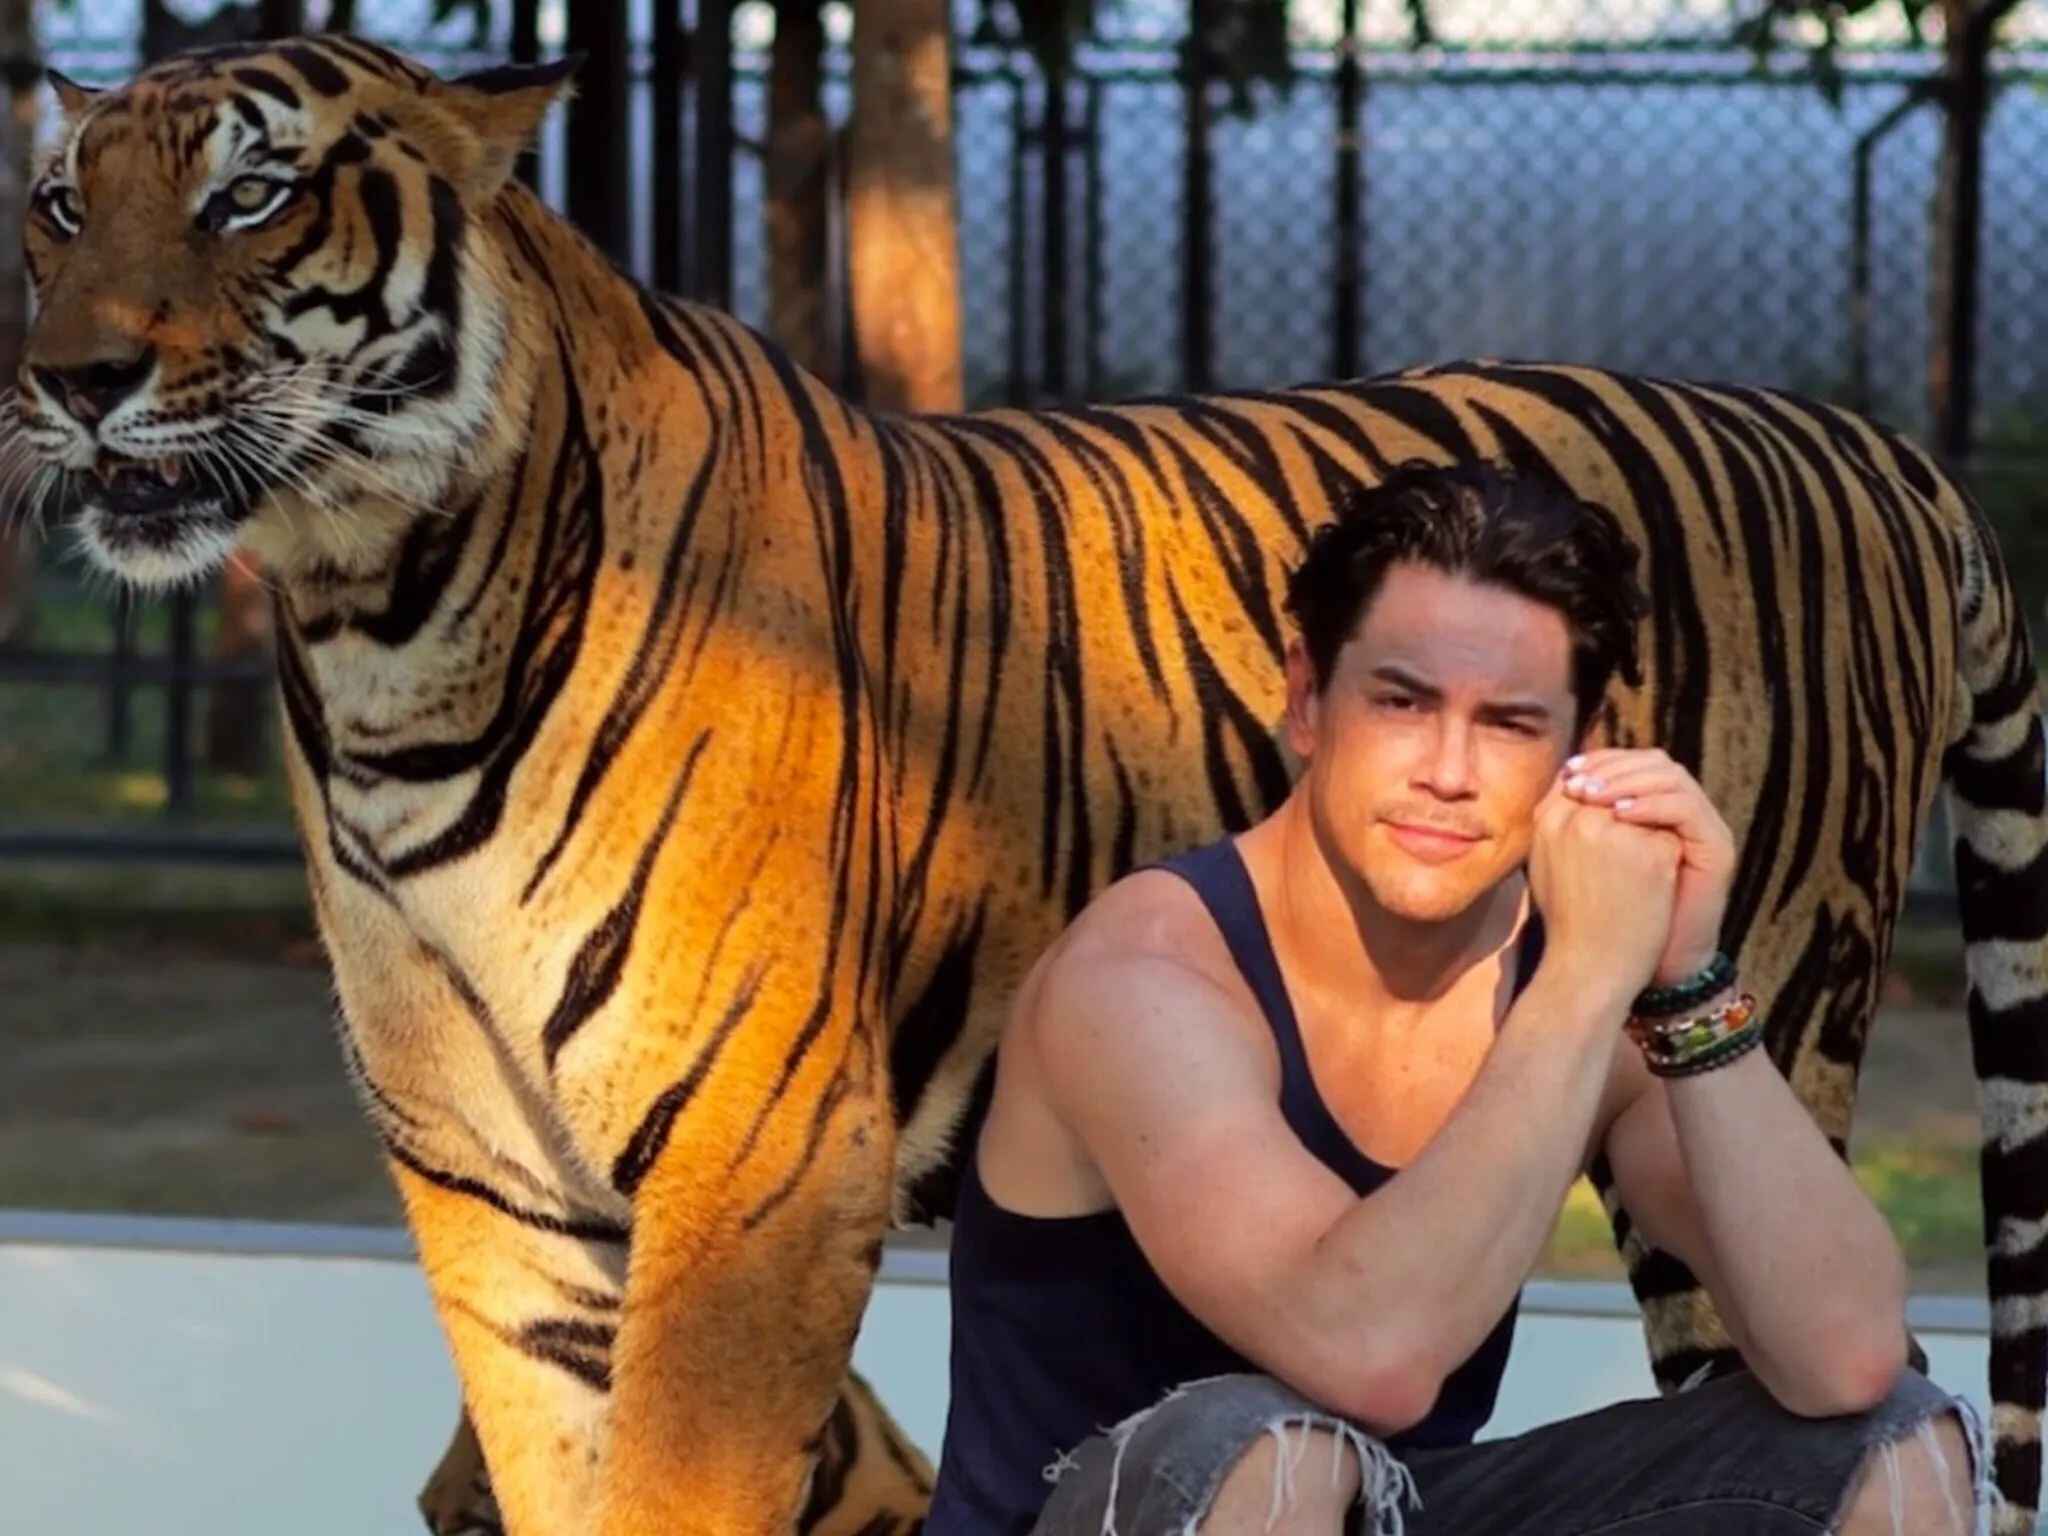 Tom Sandoval Criticized By PETA For Posing With Tiger At Thailand Zoo